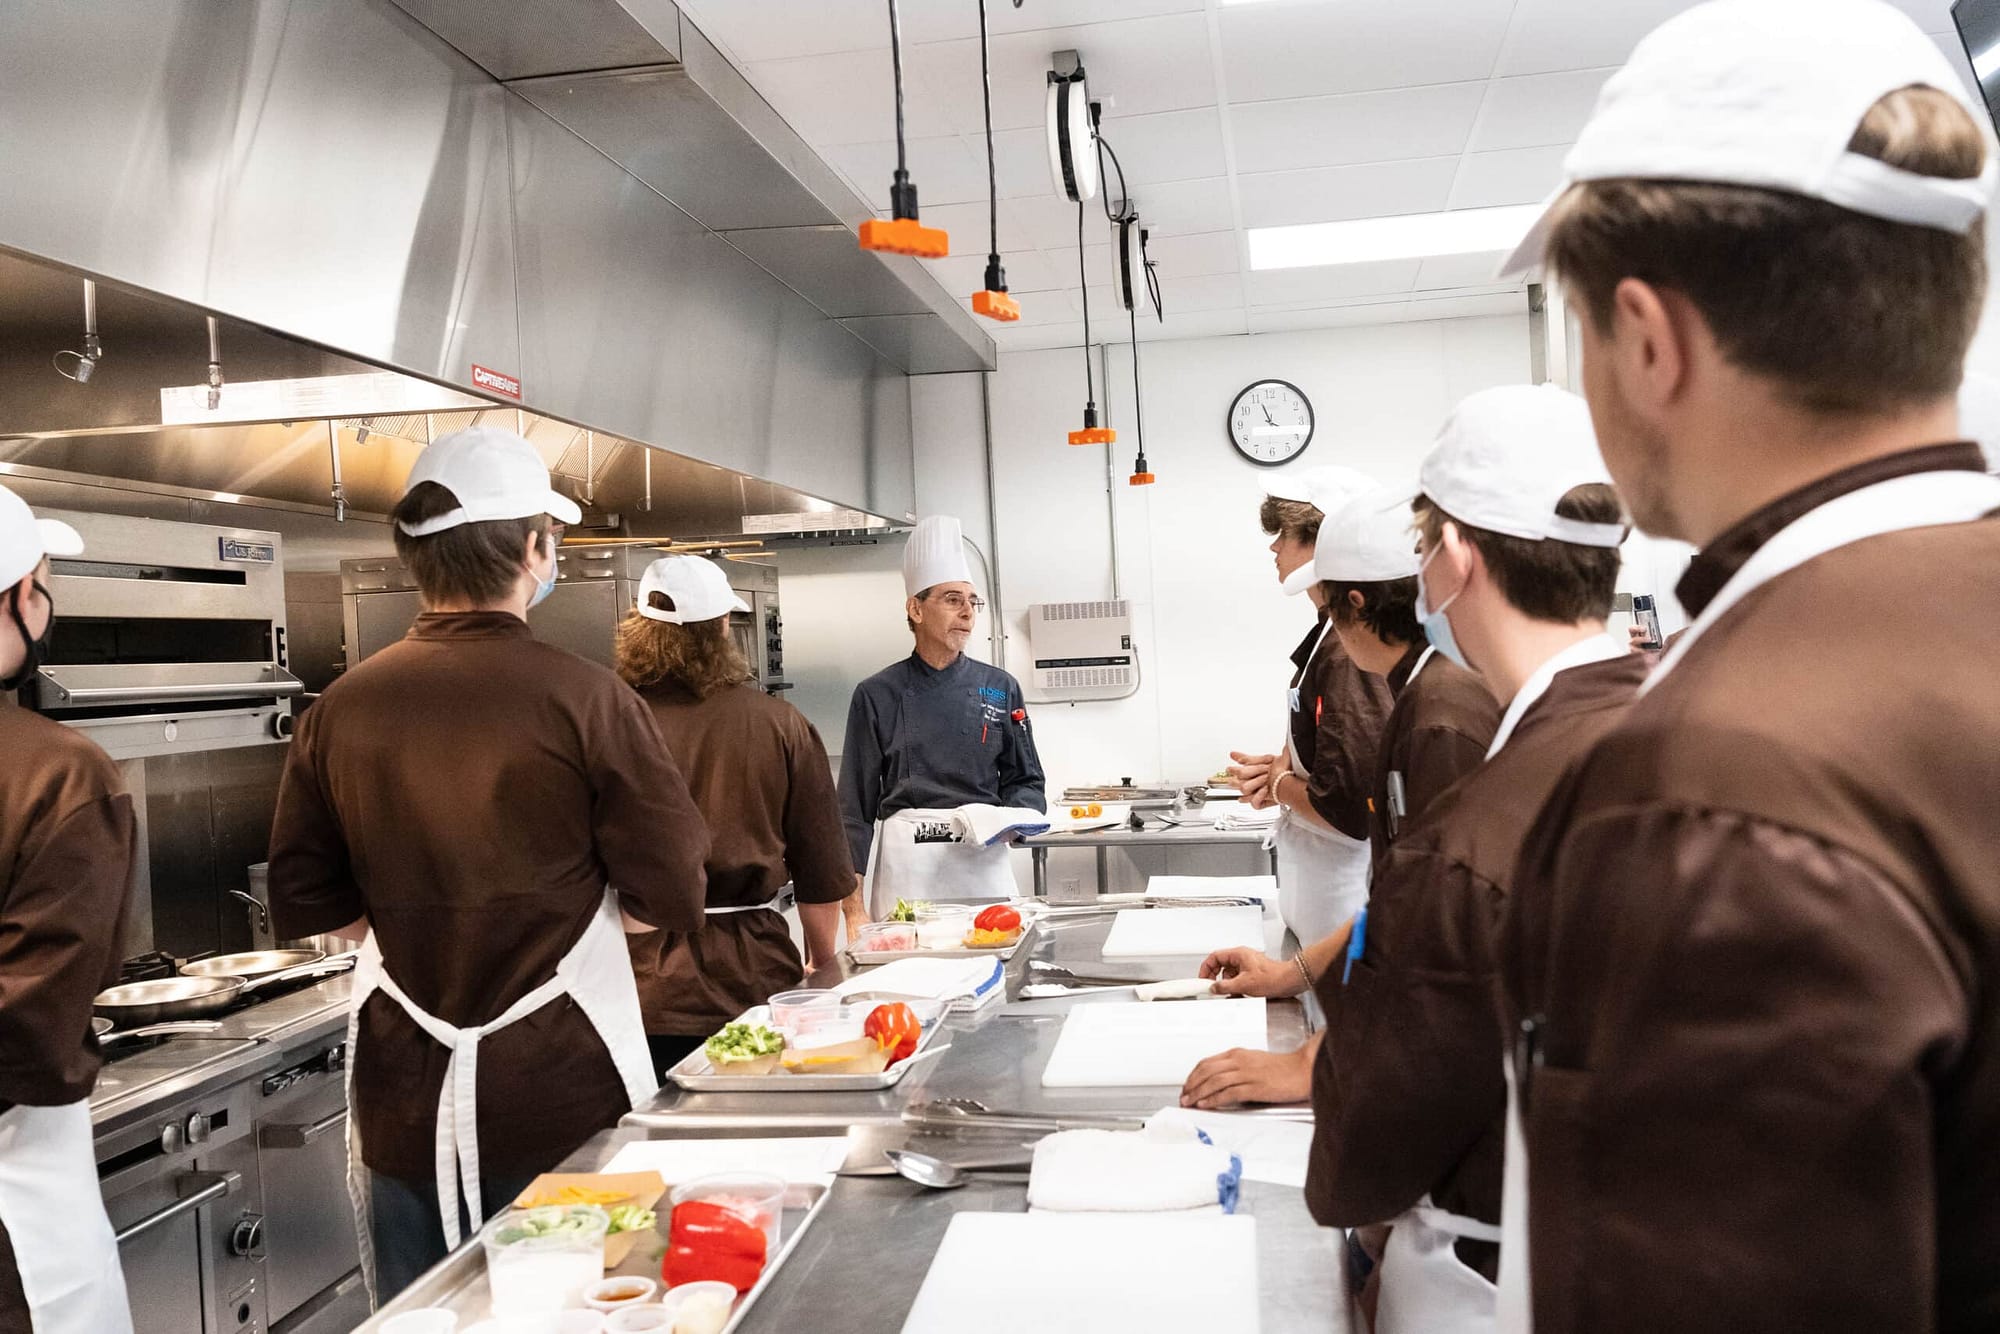 Nossi College of Art's Culinary Arts Kitchen is visited by Wilson Central HS